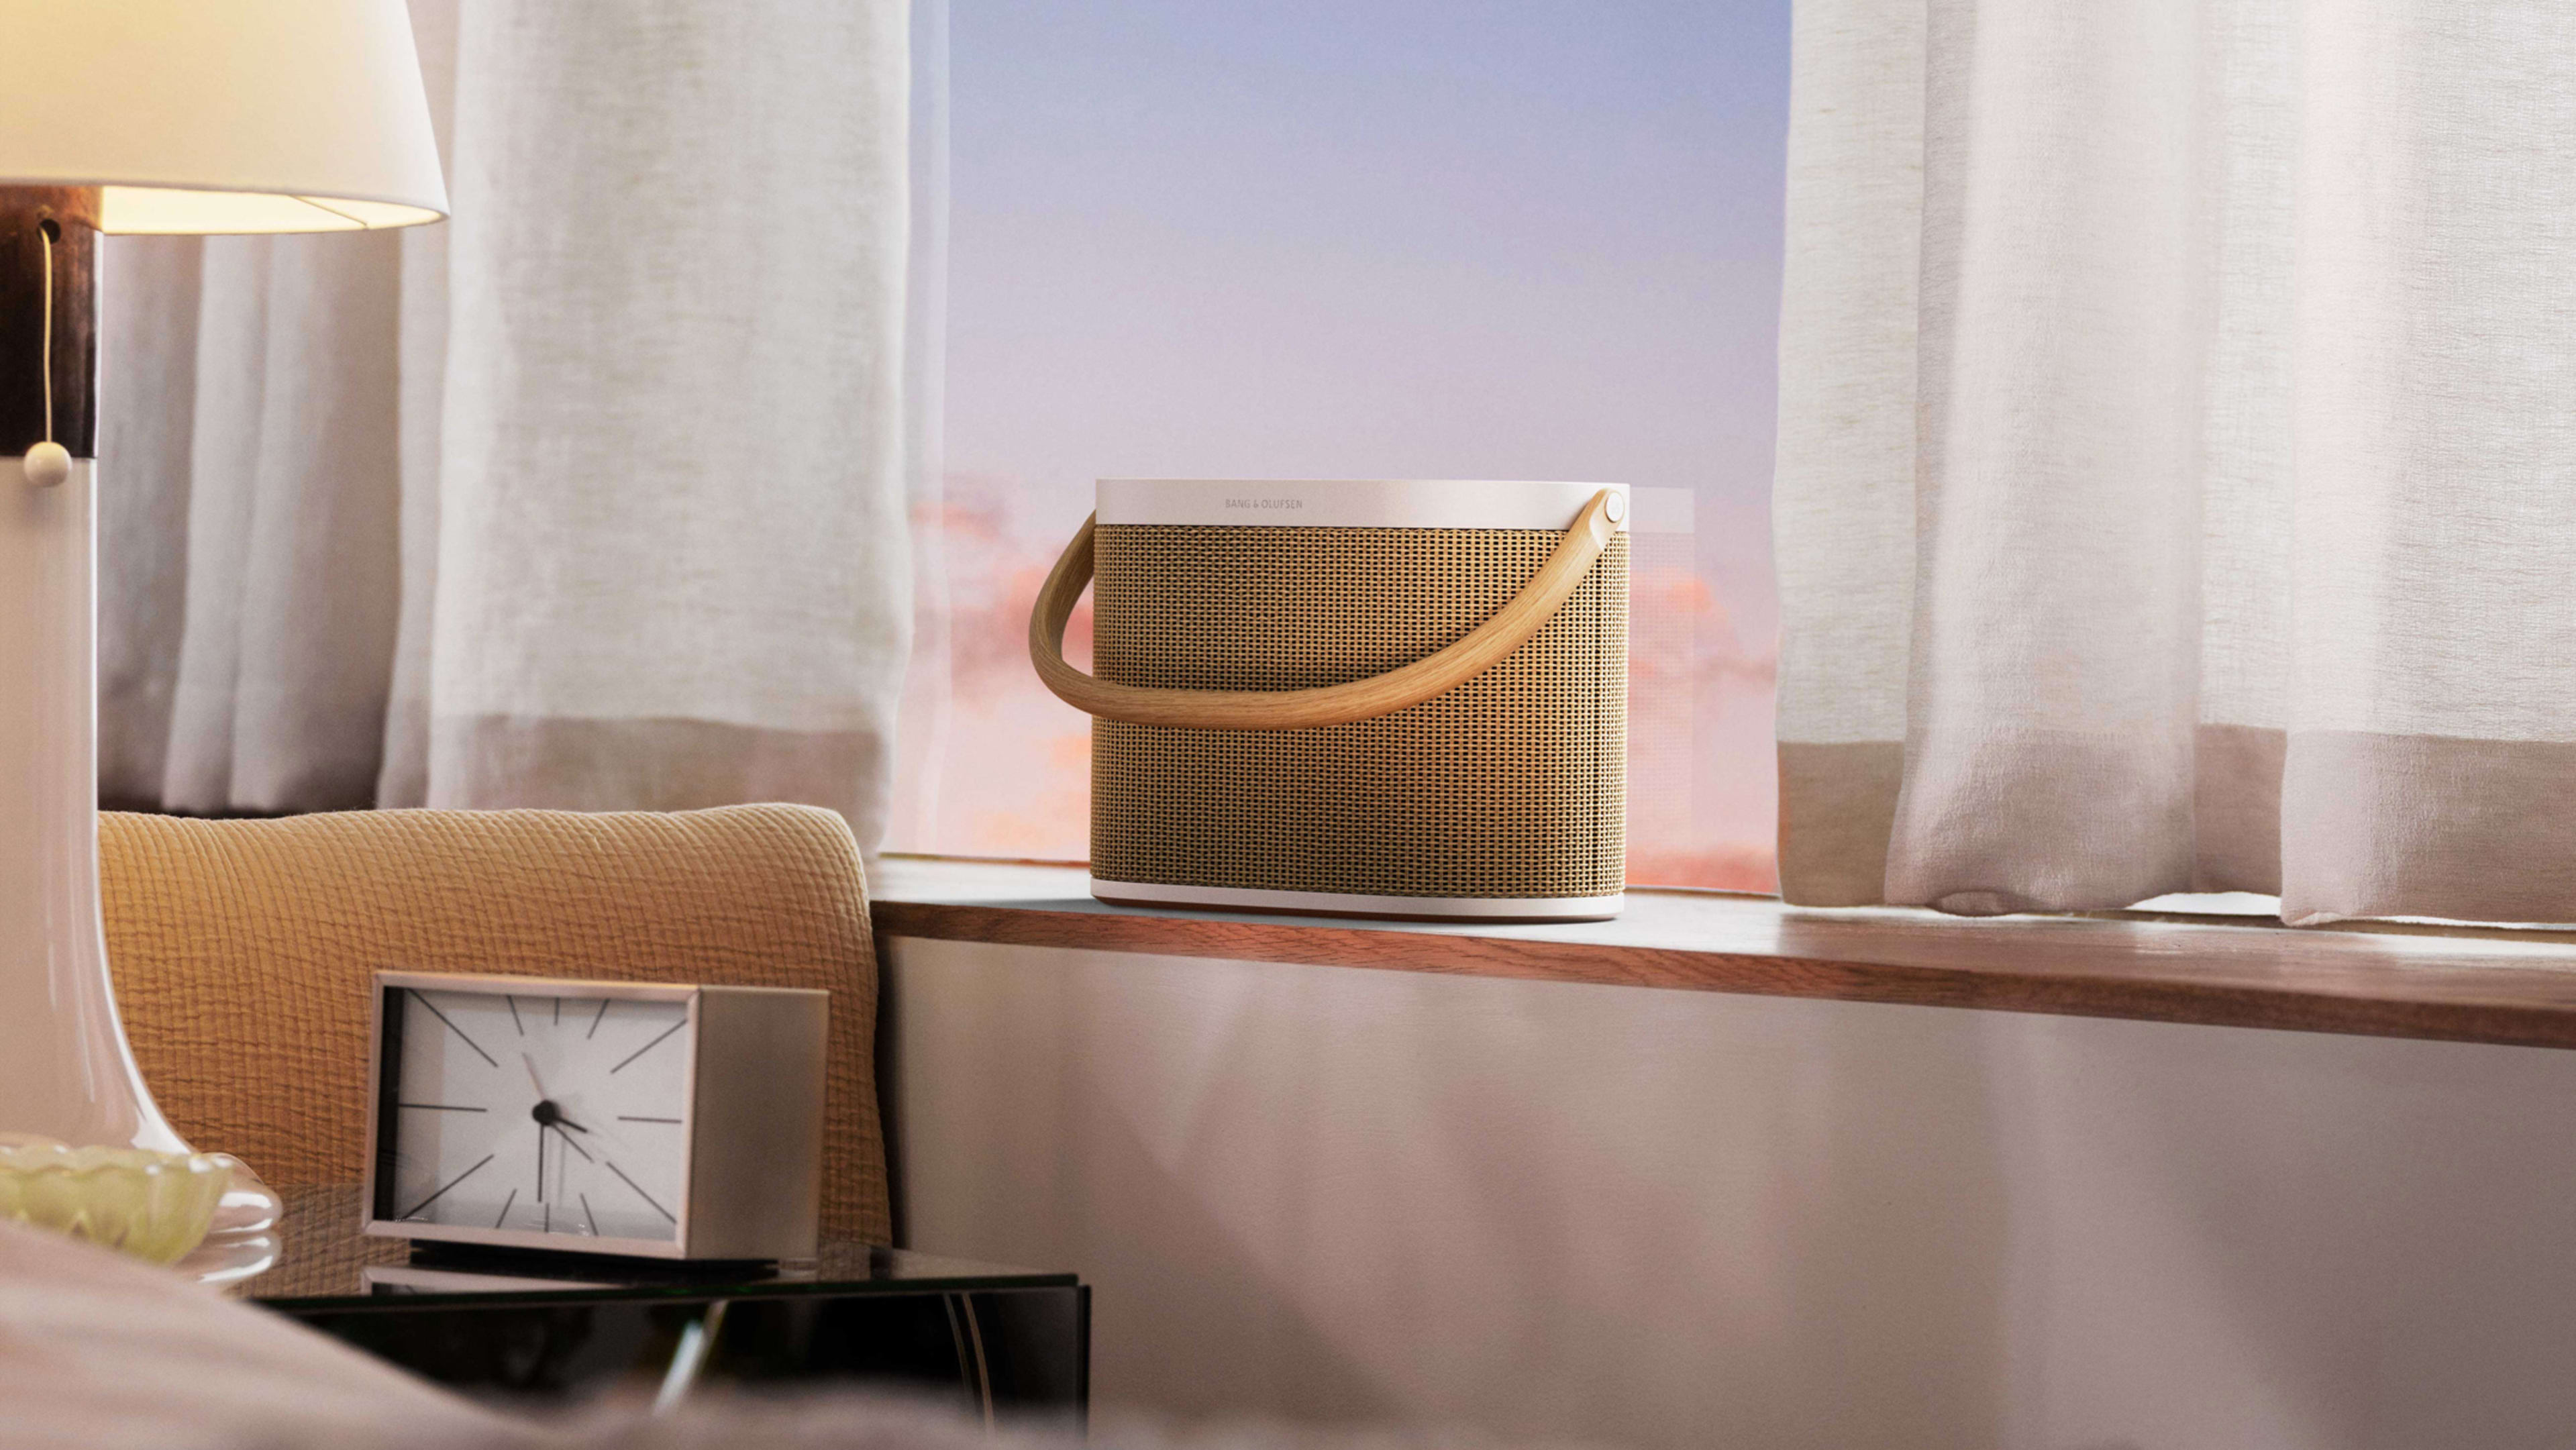 Bang & Olufsen designed its new speaker for a long life, and inevitable death